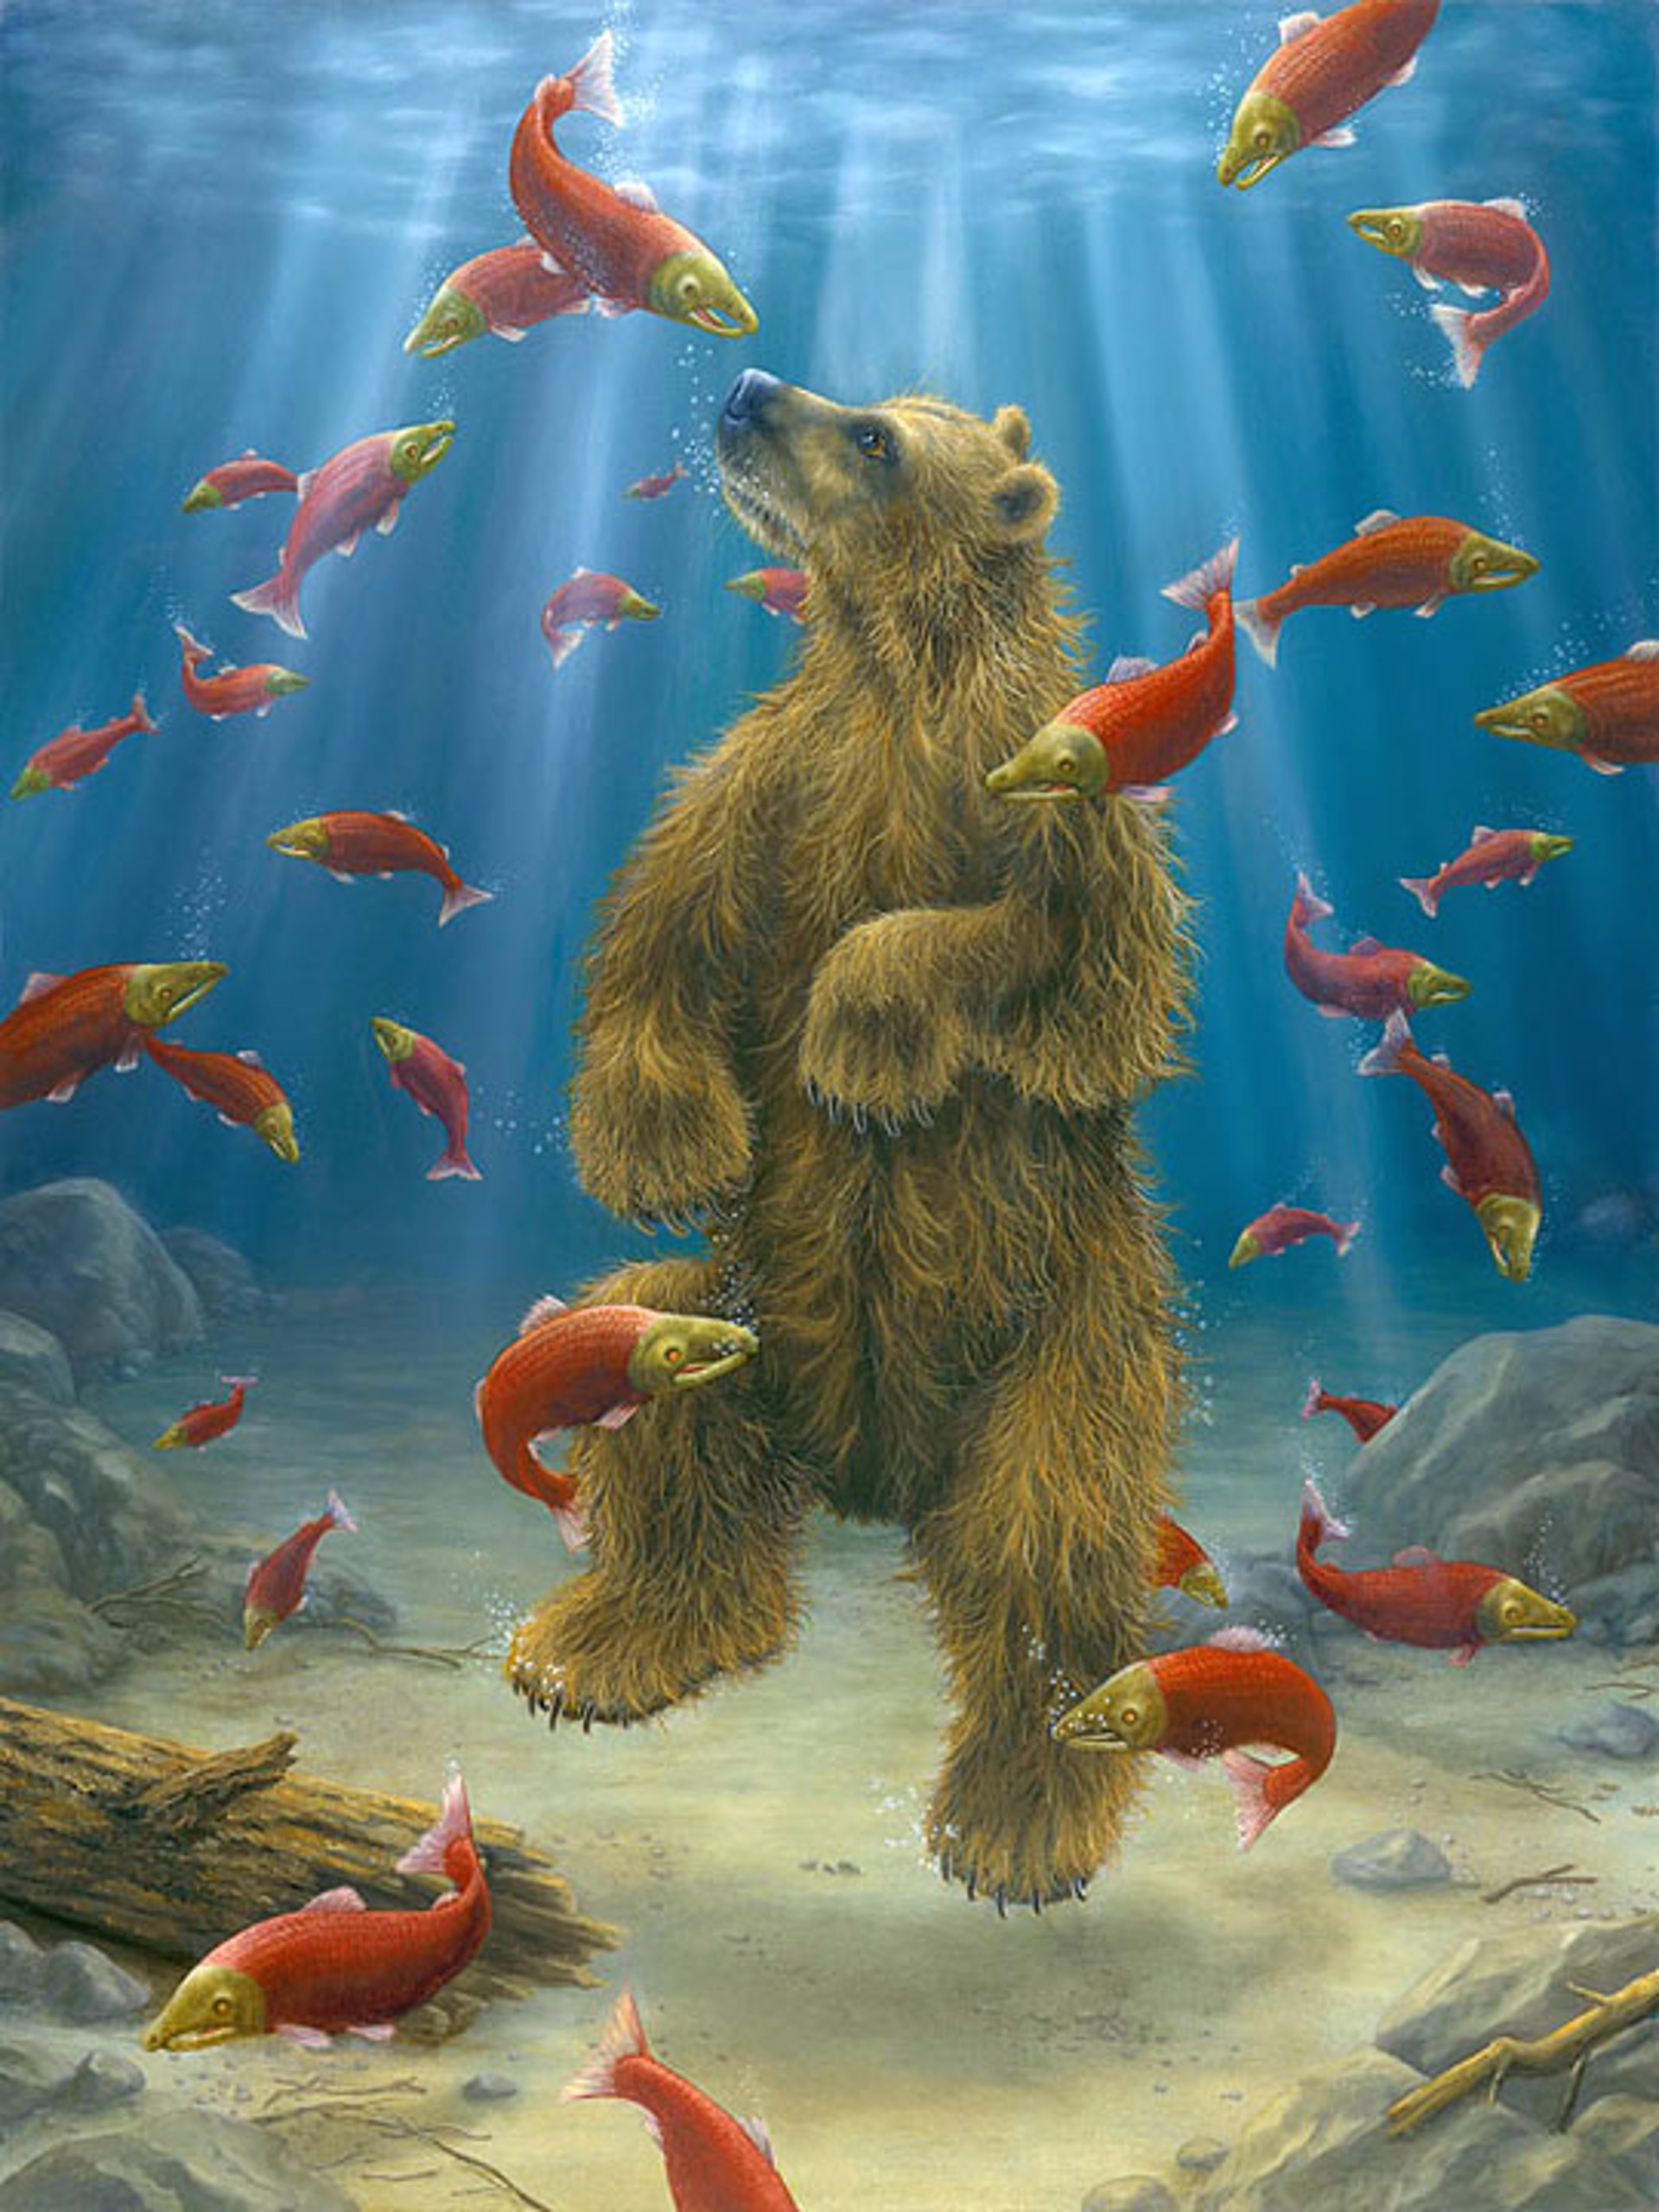 The Swimmer by Robert Bissell